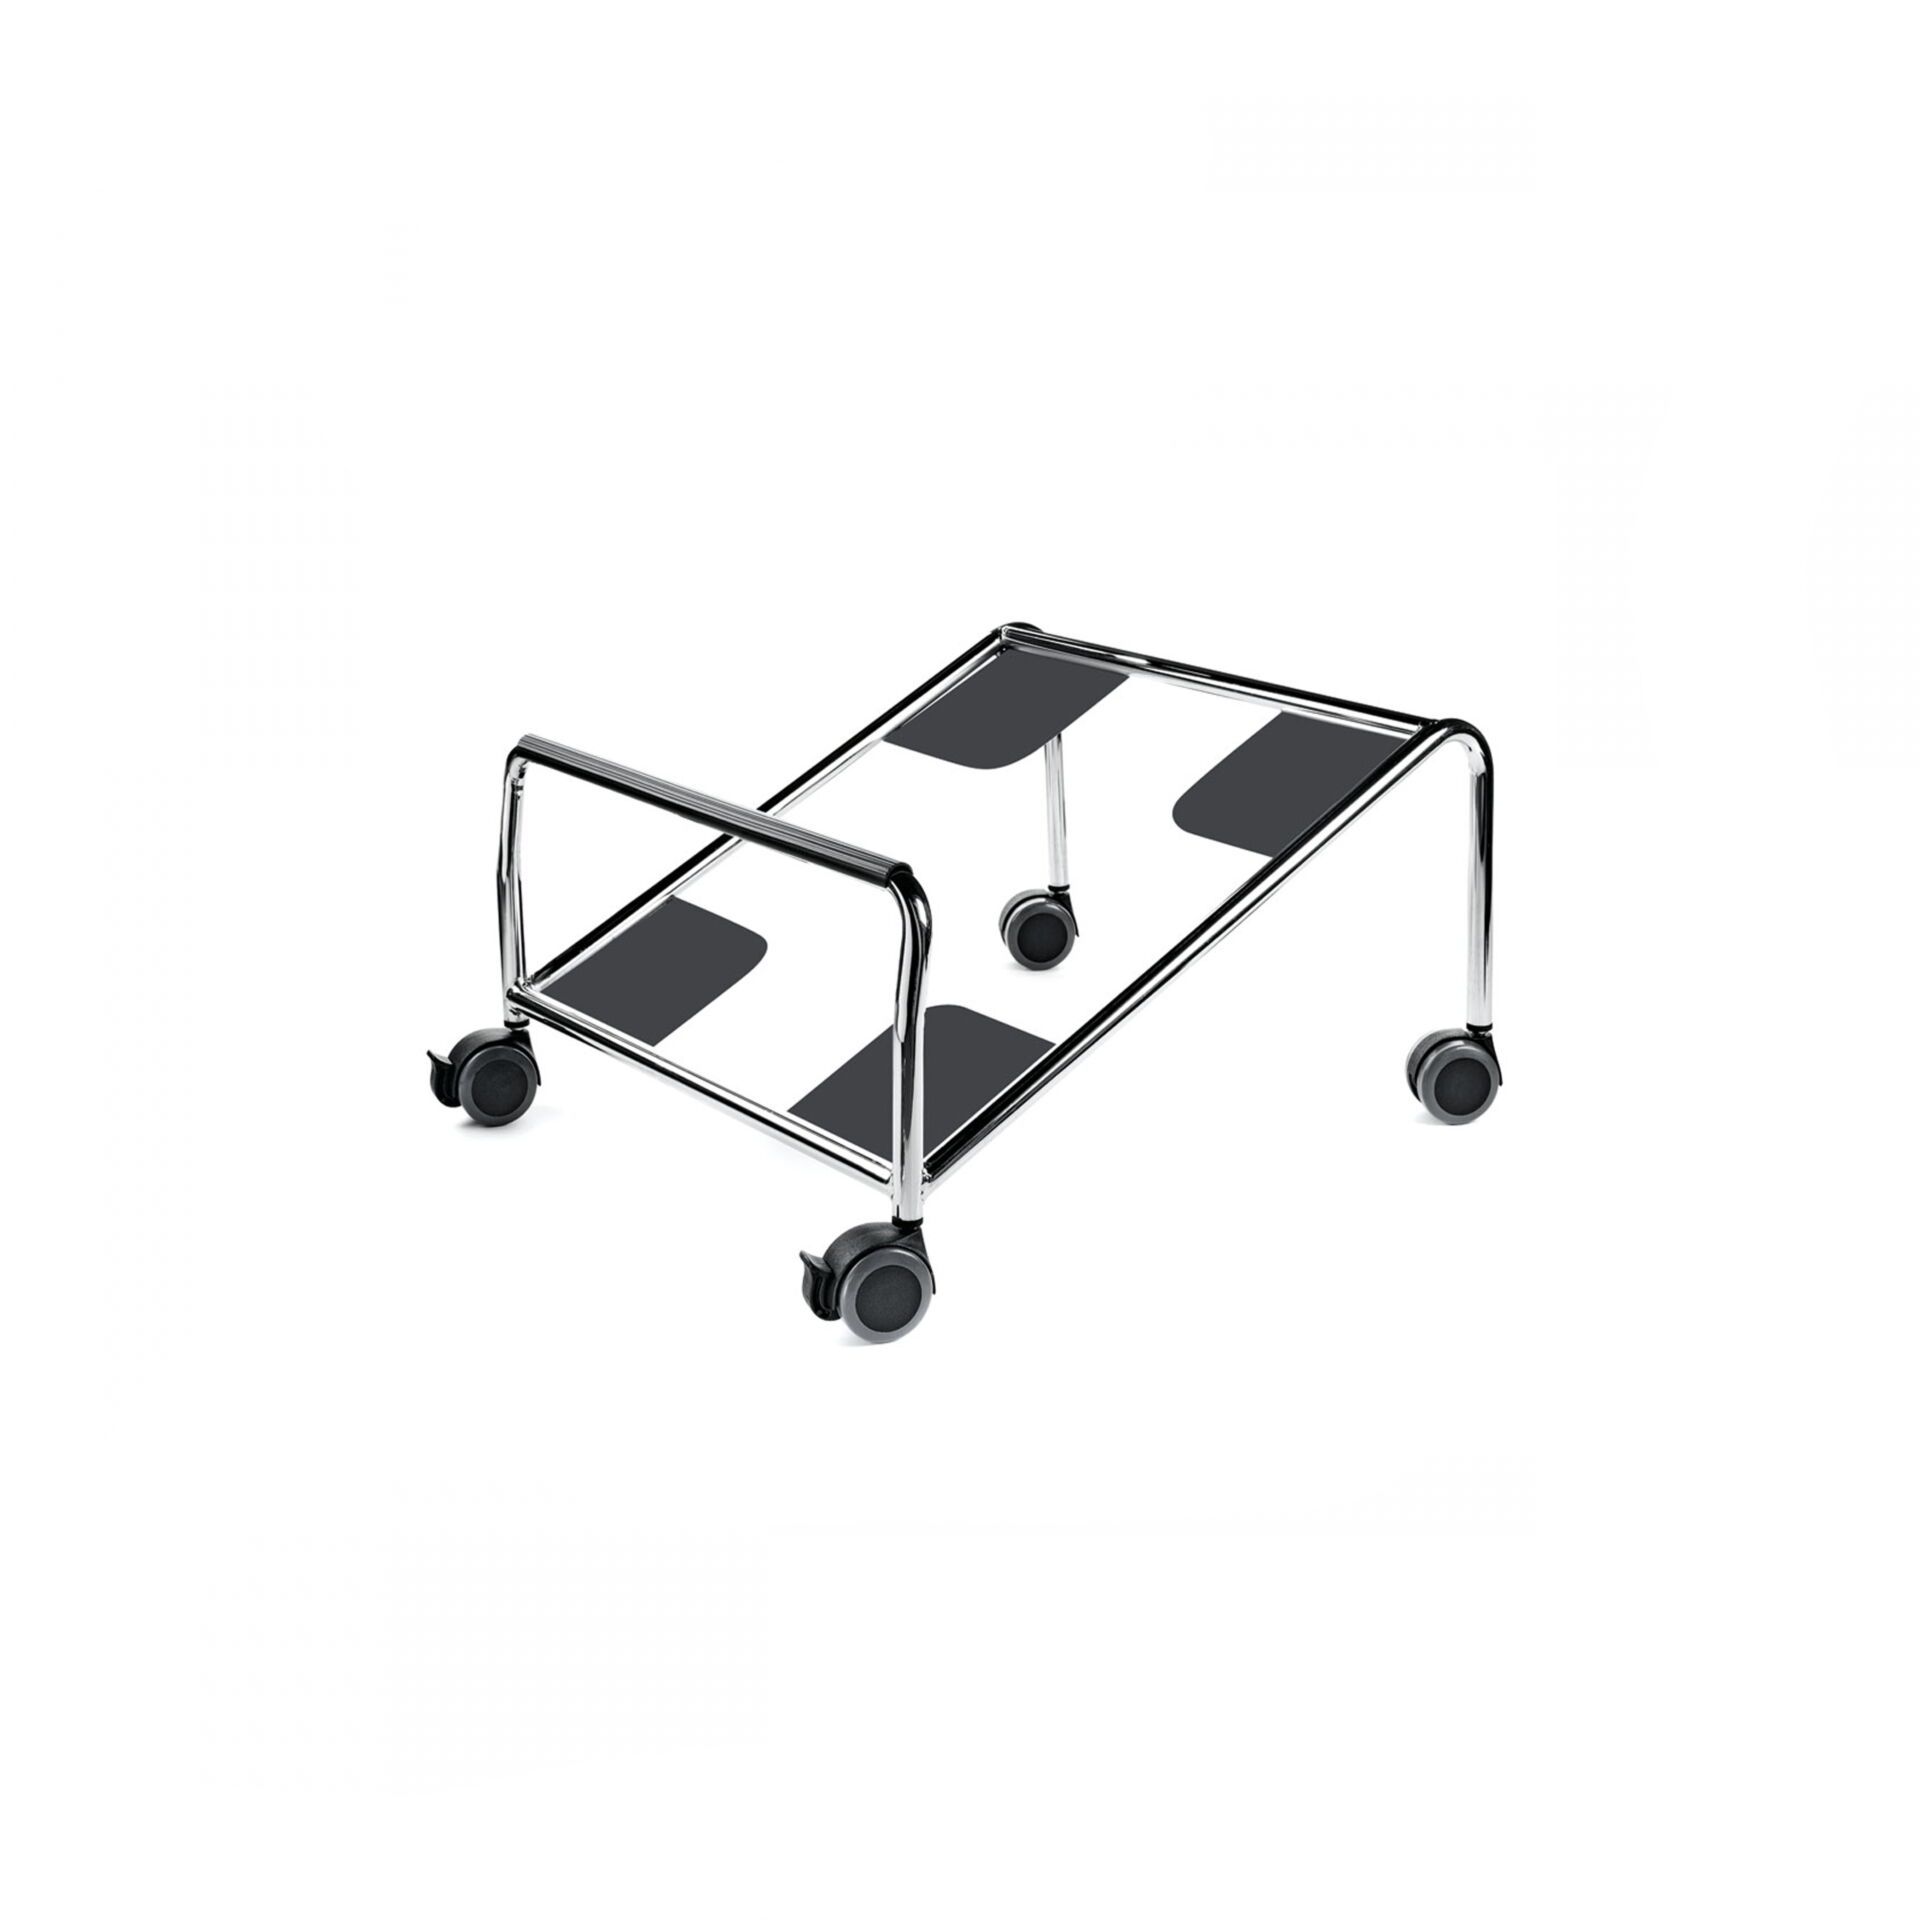 Stolsvagn Transport cart in metal legs product image 1